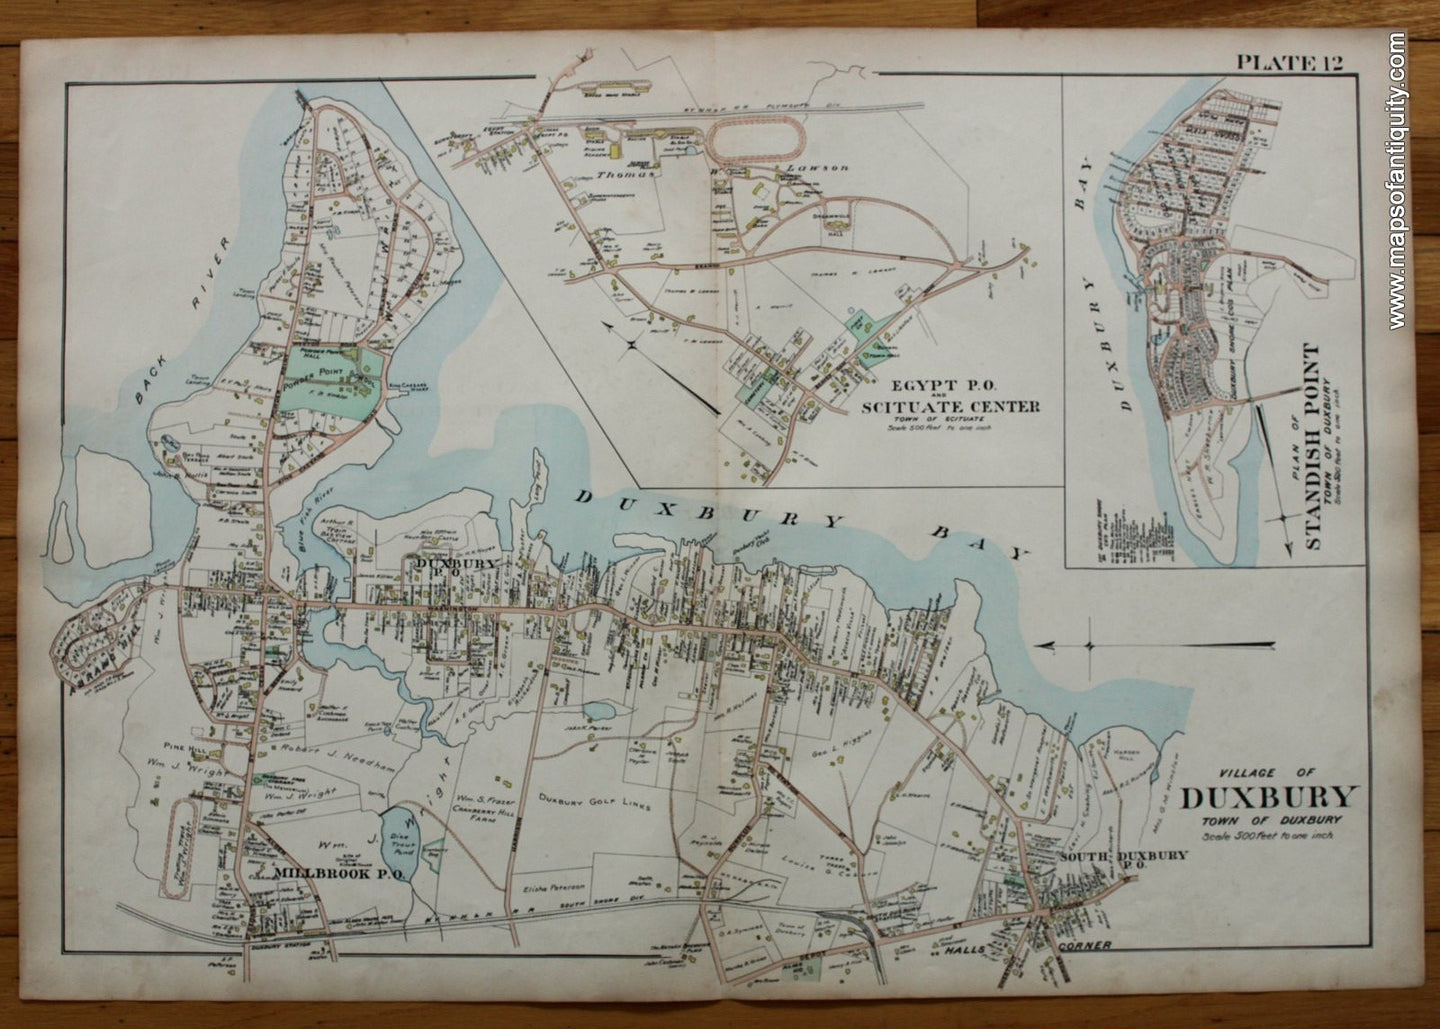 1903 - Village of Duxbury, Scituate, Egypt PO, and Standish Point (MA) **SOLD** - Antique Map